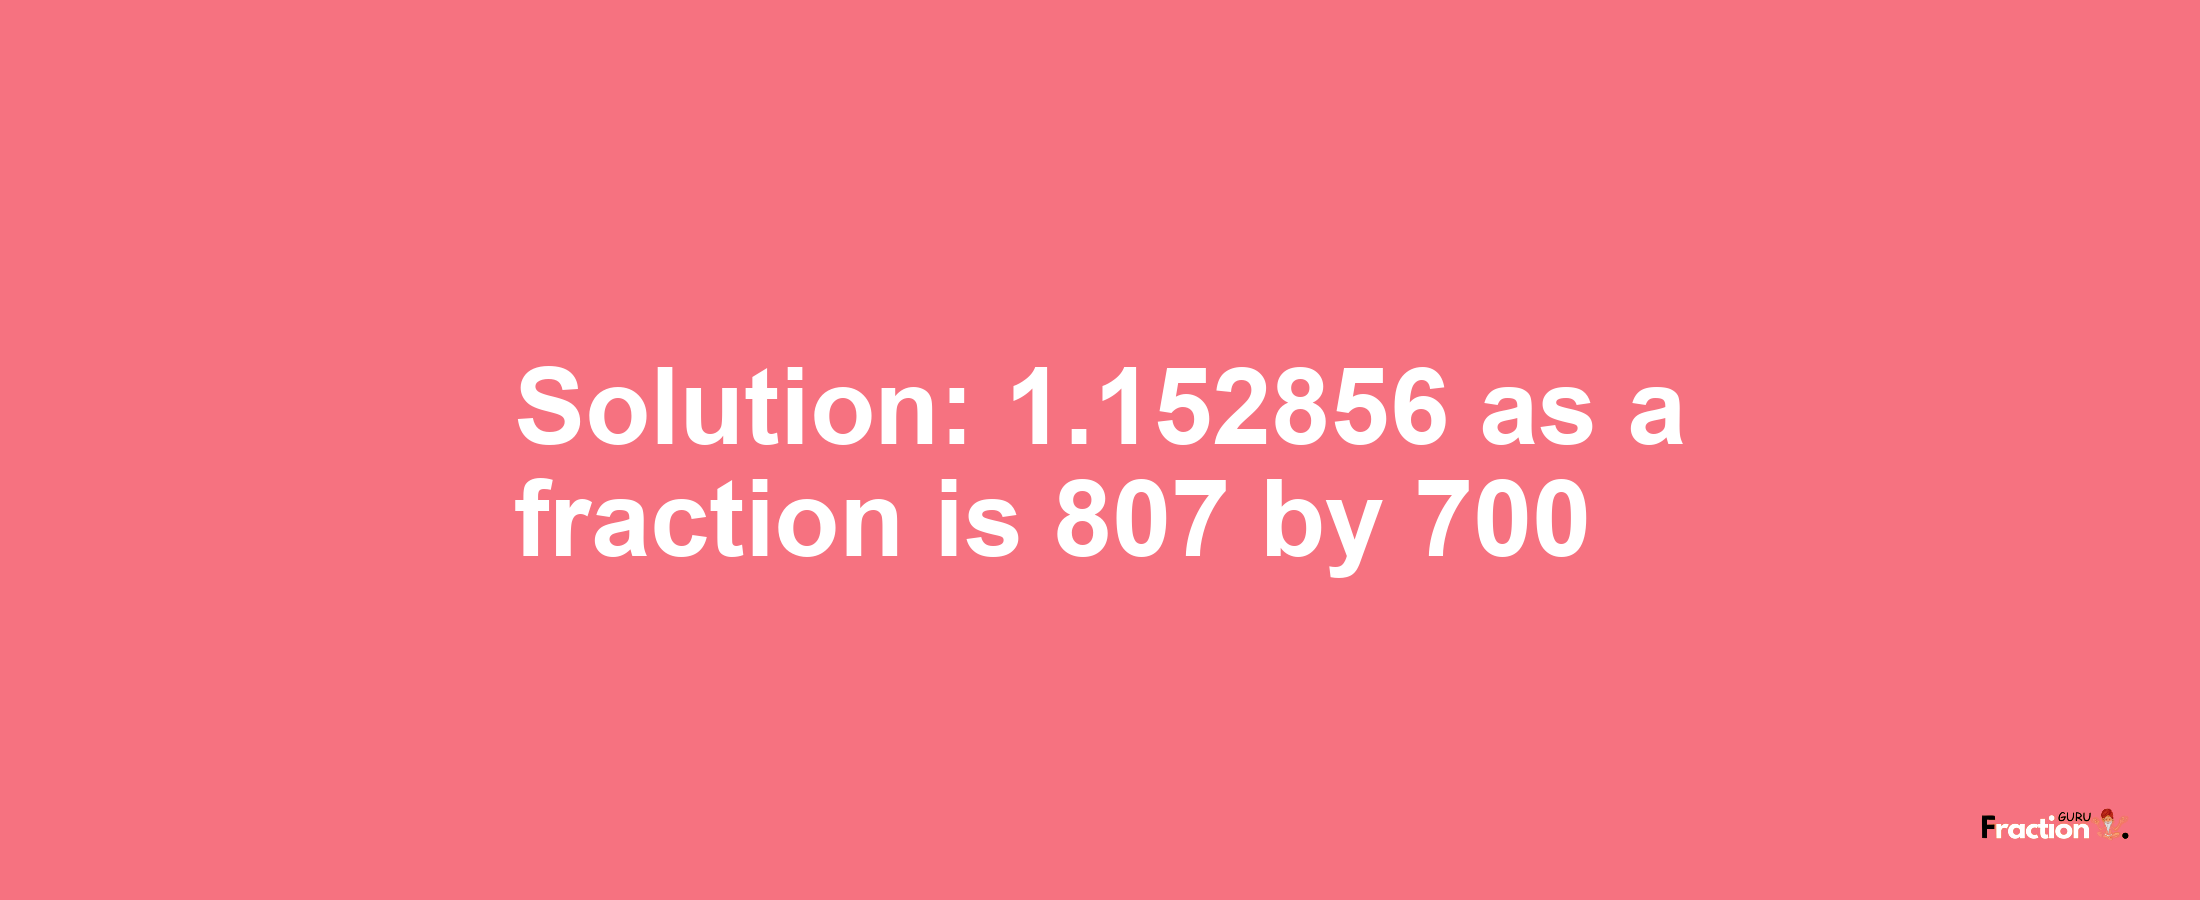 Solution:1.152856 as a fraction is 807/700